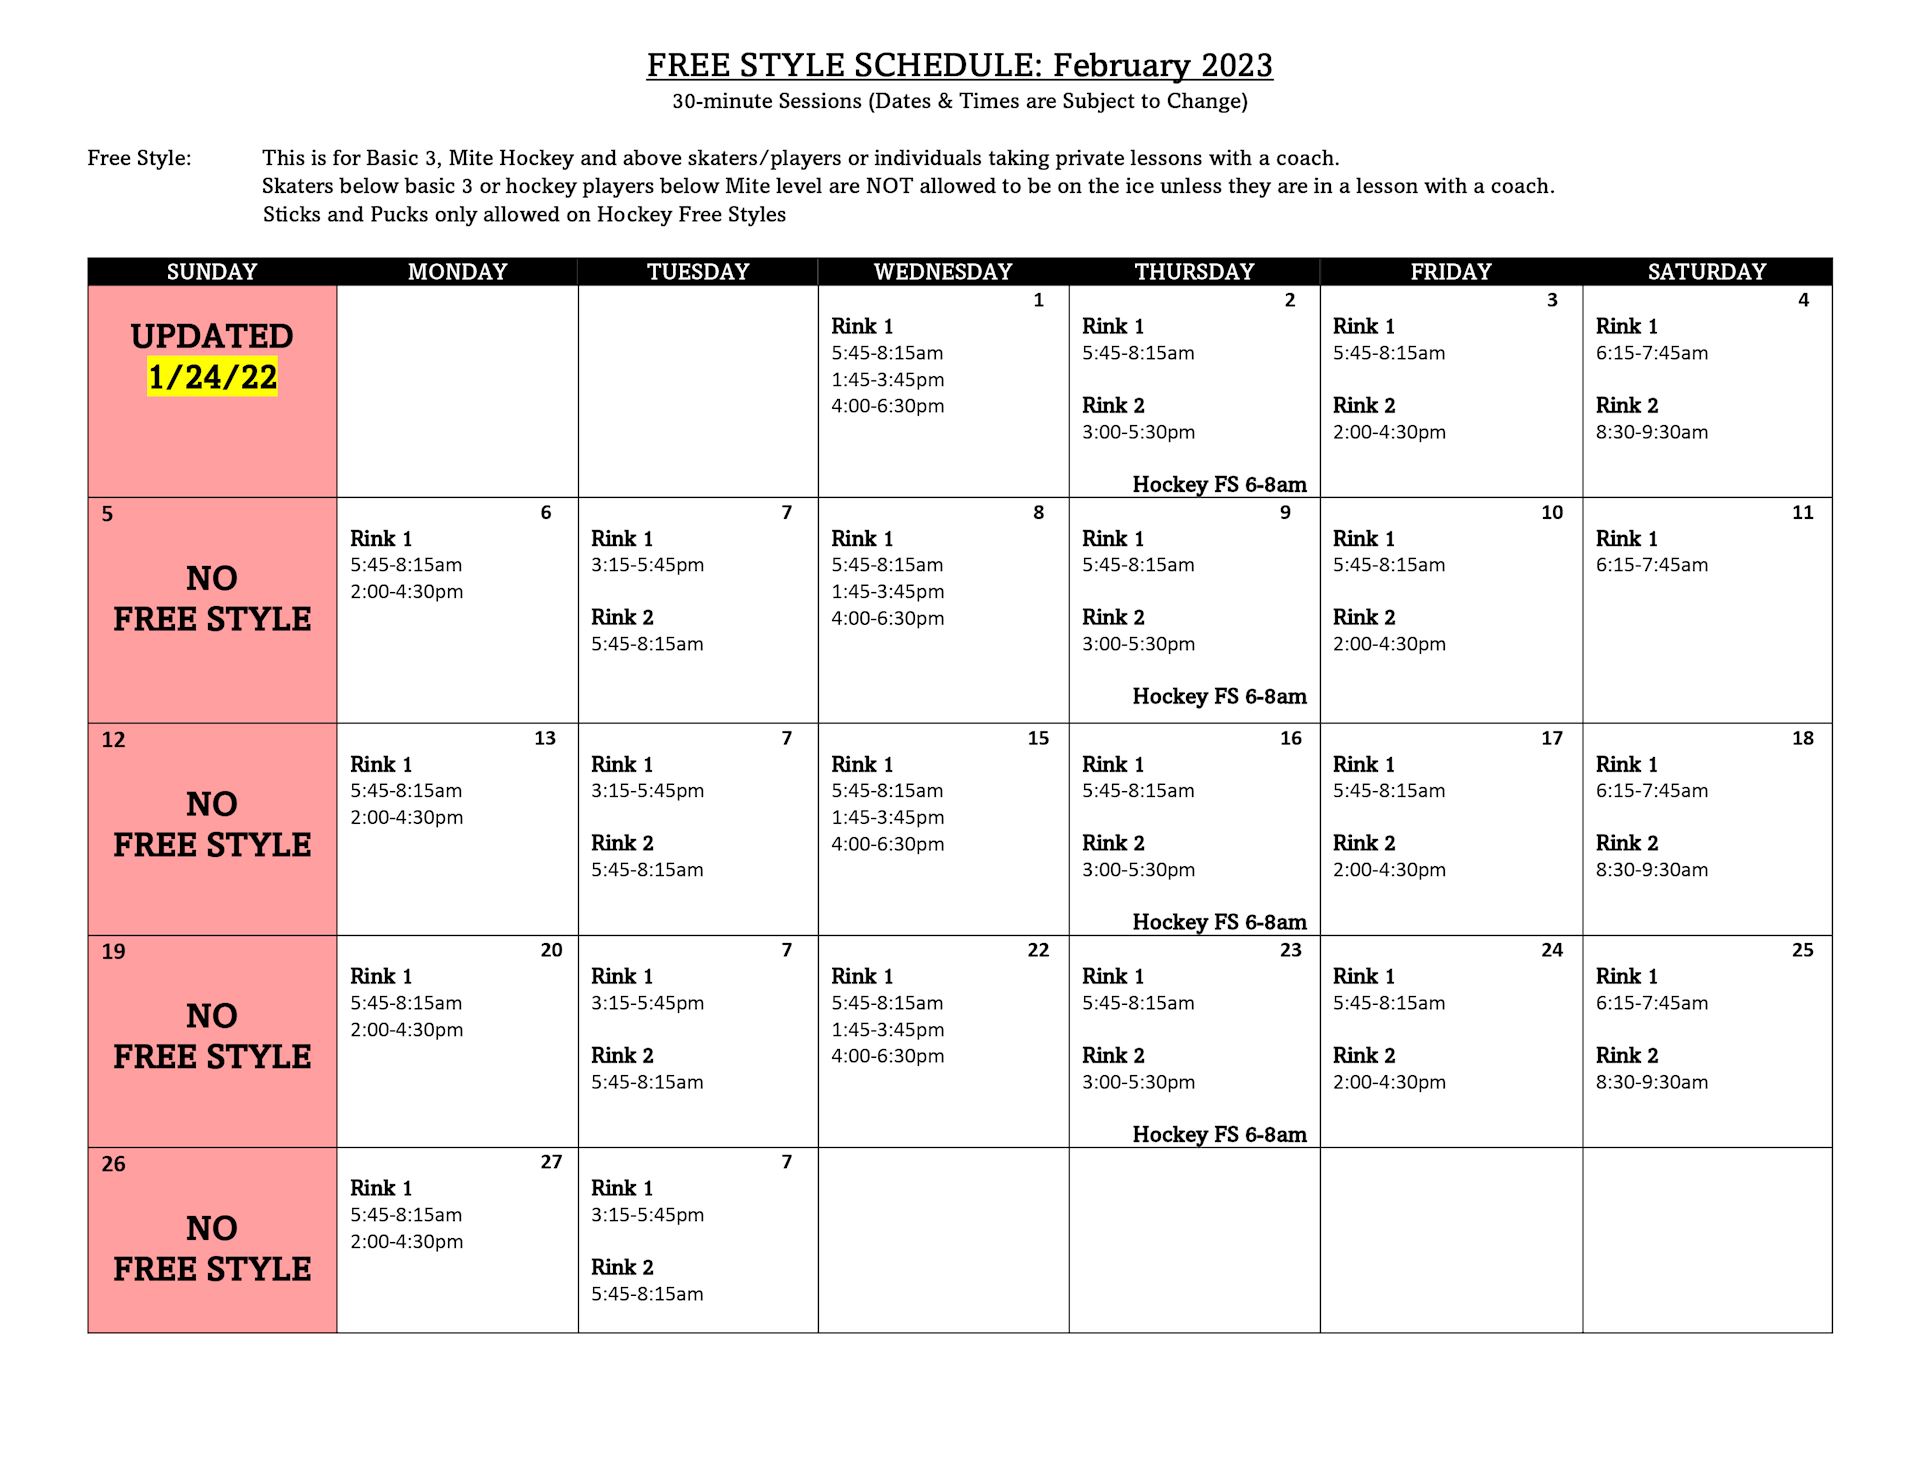 February Free Style Schedule